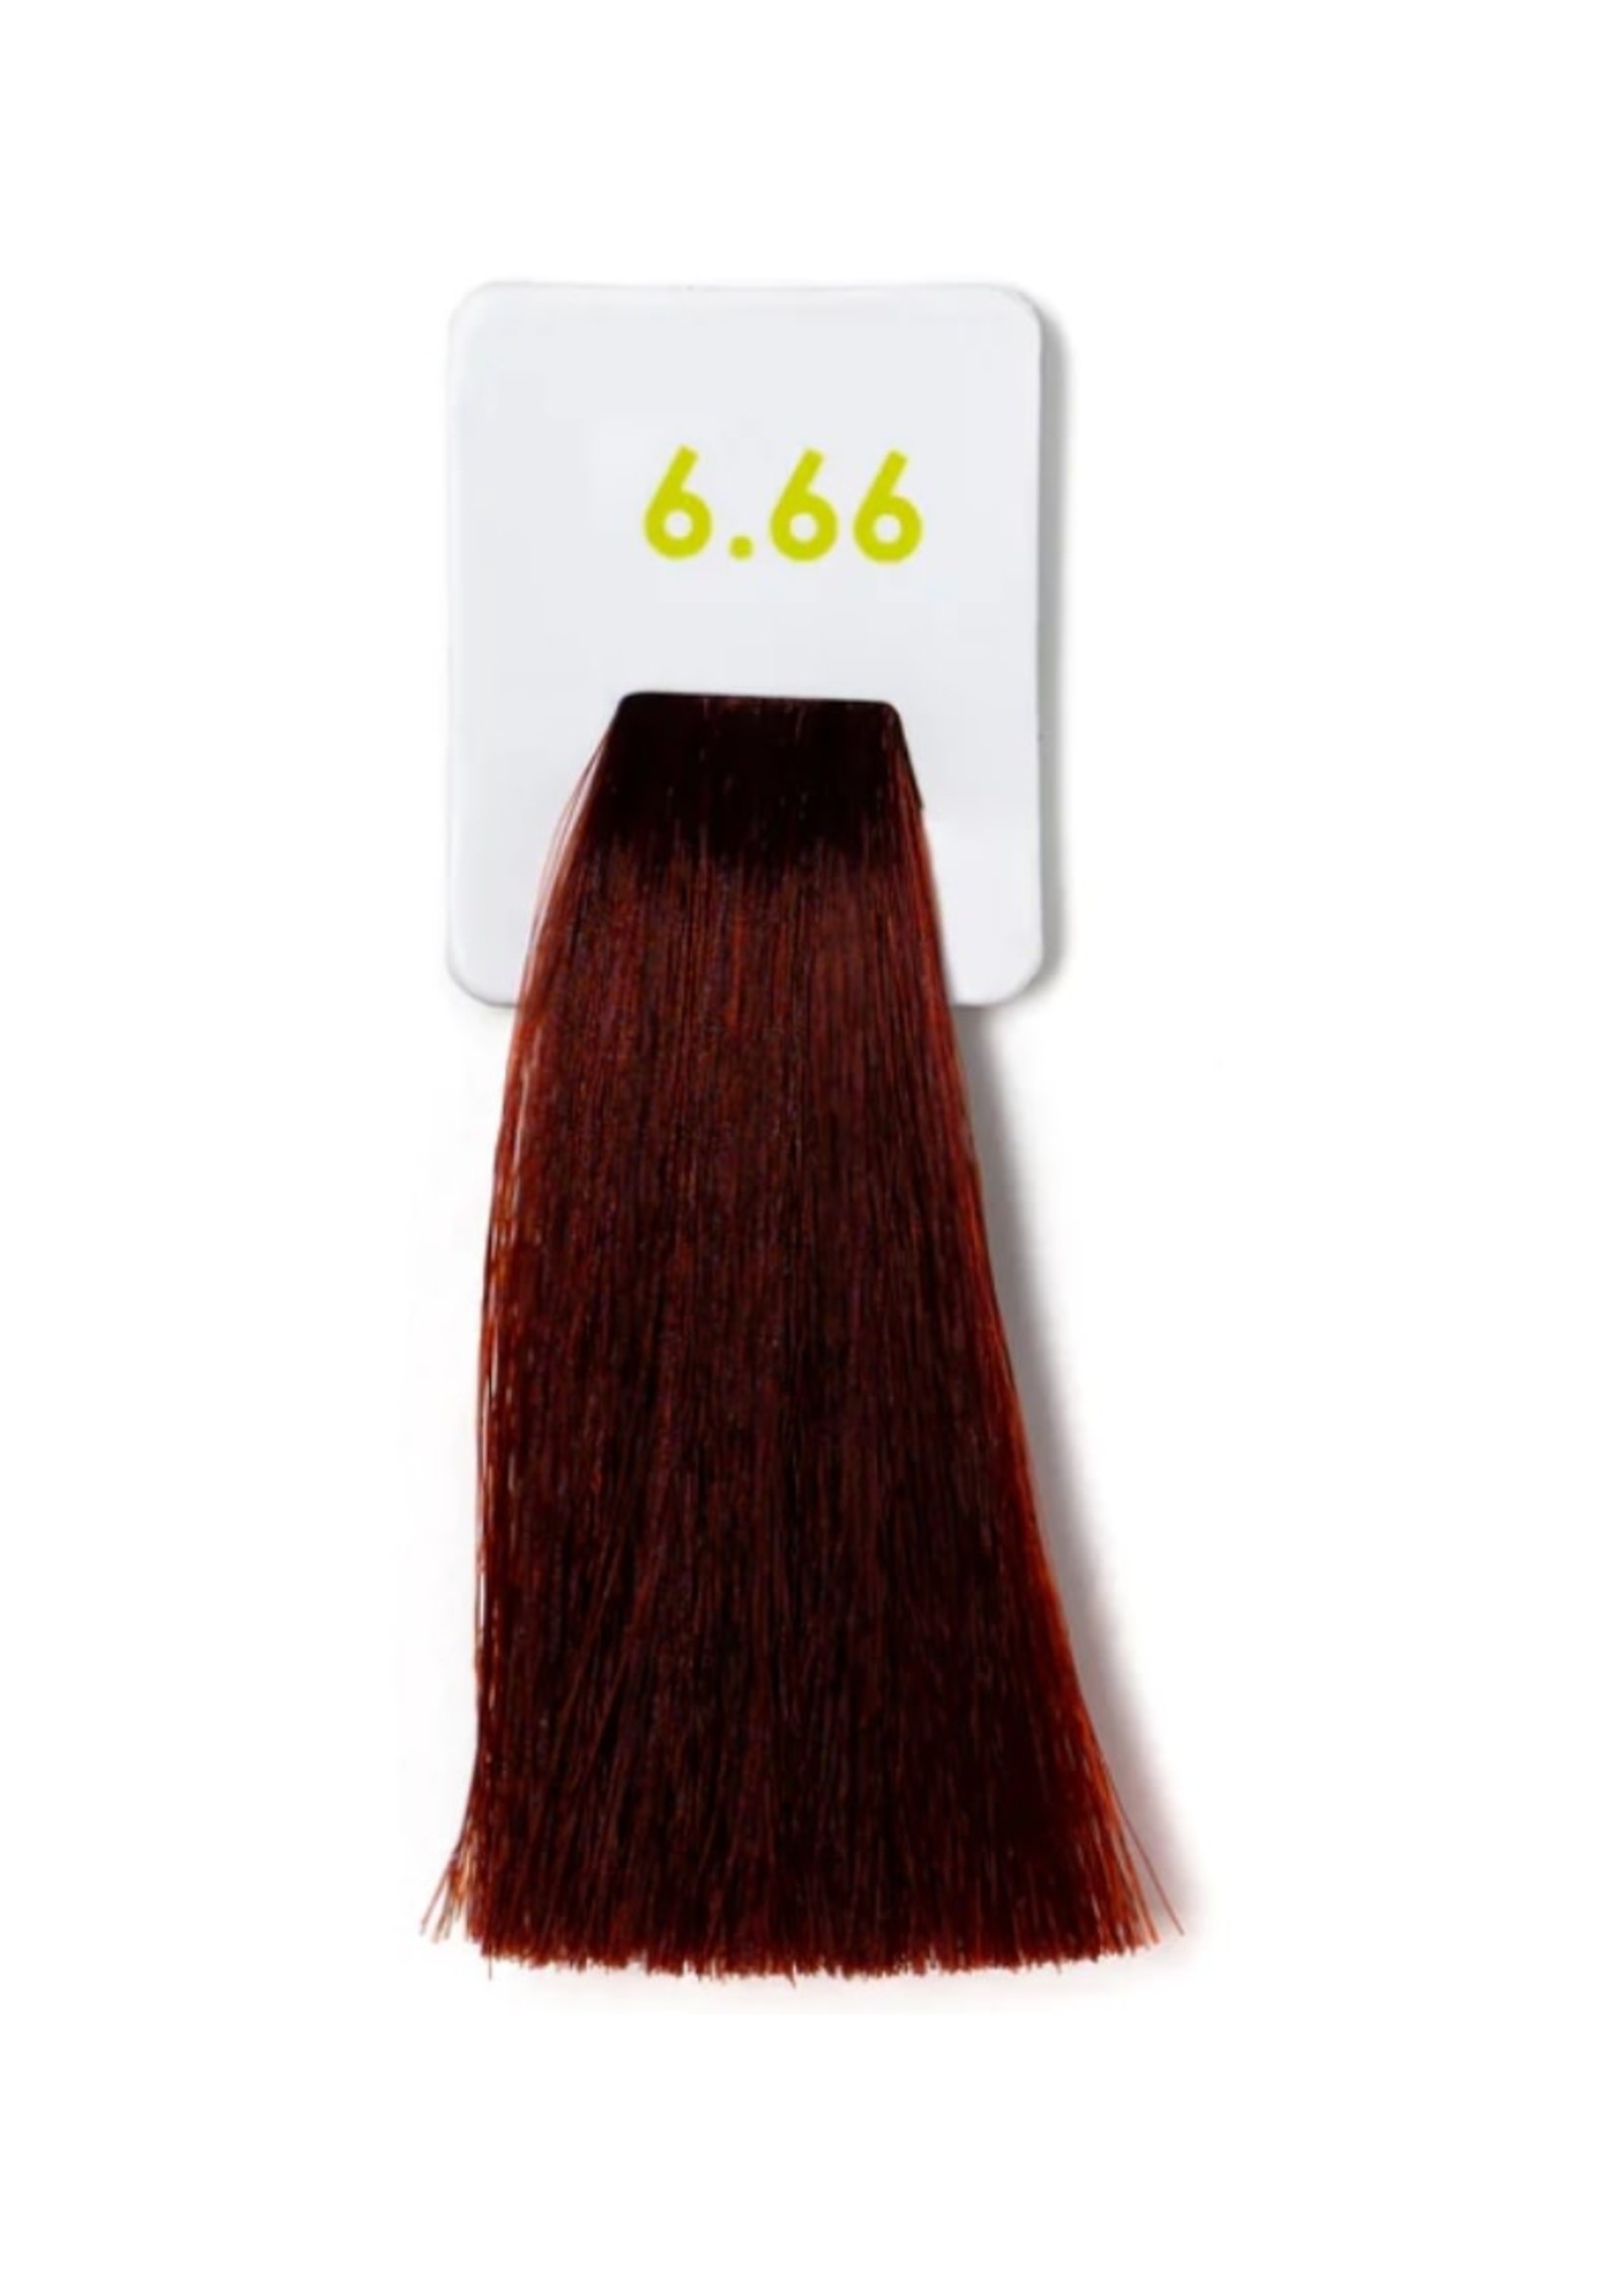 Nouvelle Nouvelle Lively Ammonia-Free Hair Colour 6.66 Dark Intense Red Blonde 100ml